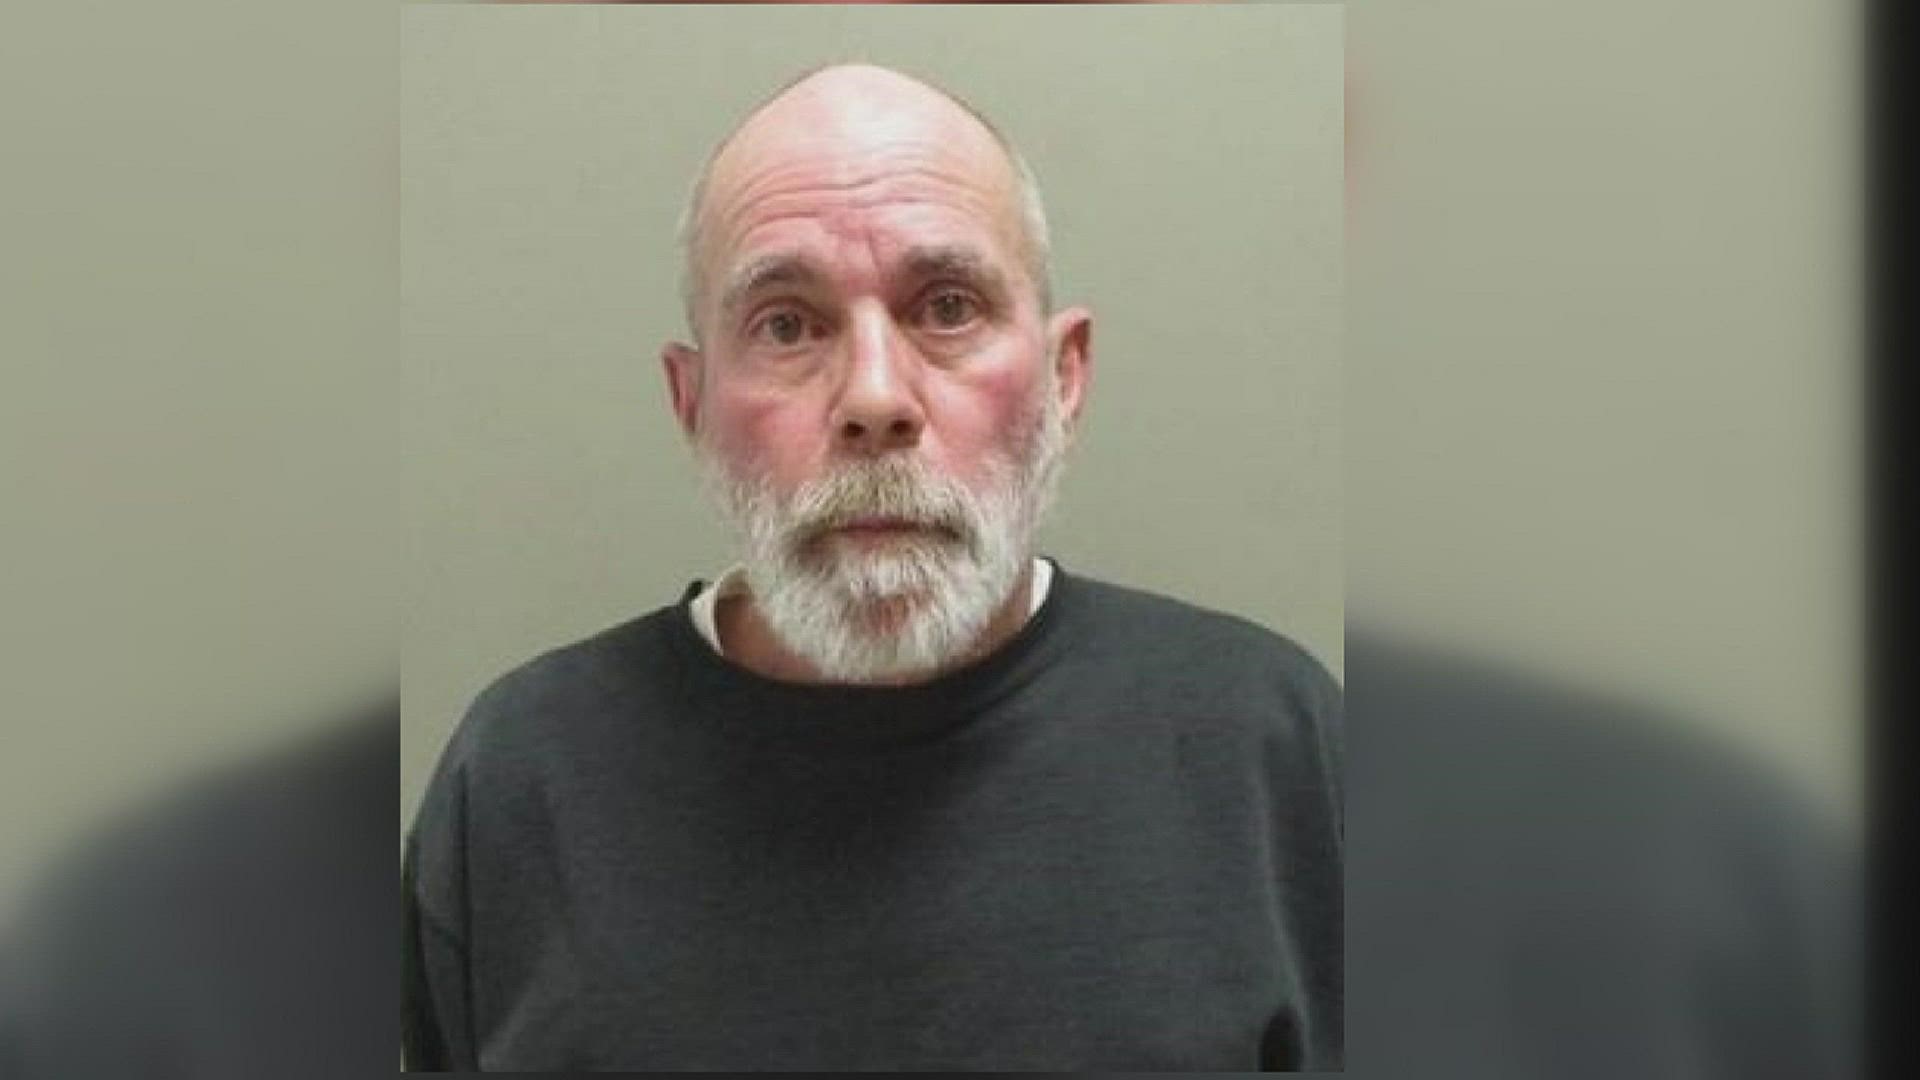 A Roseville man is in Tennessee jail after being arrested last month after re-tested evidence implicated him in the 1996 homicide of Barbara Danley Johnson.